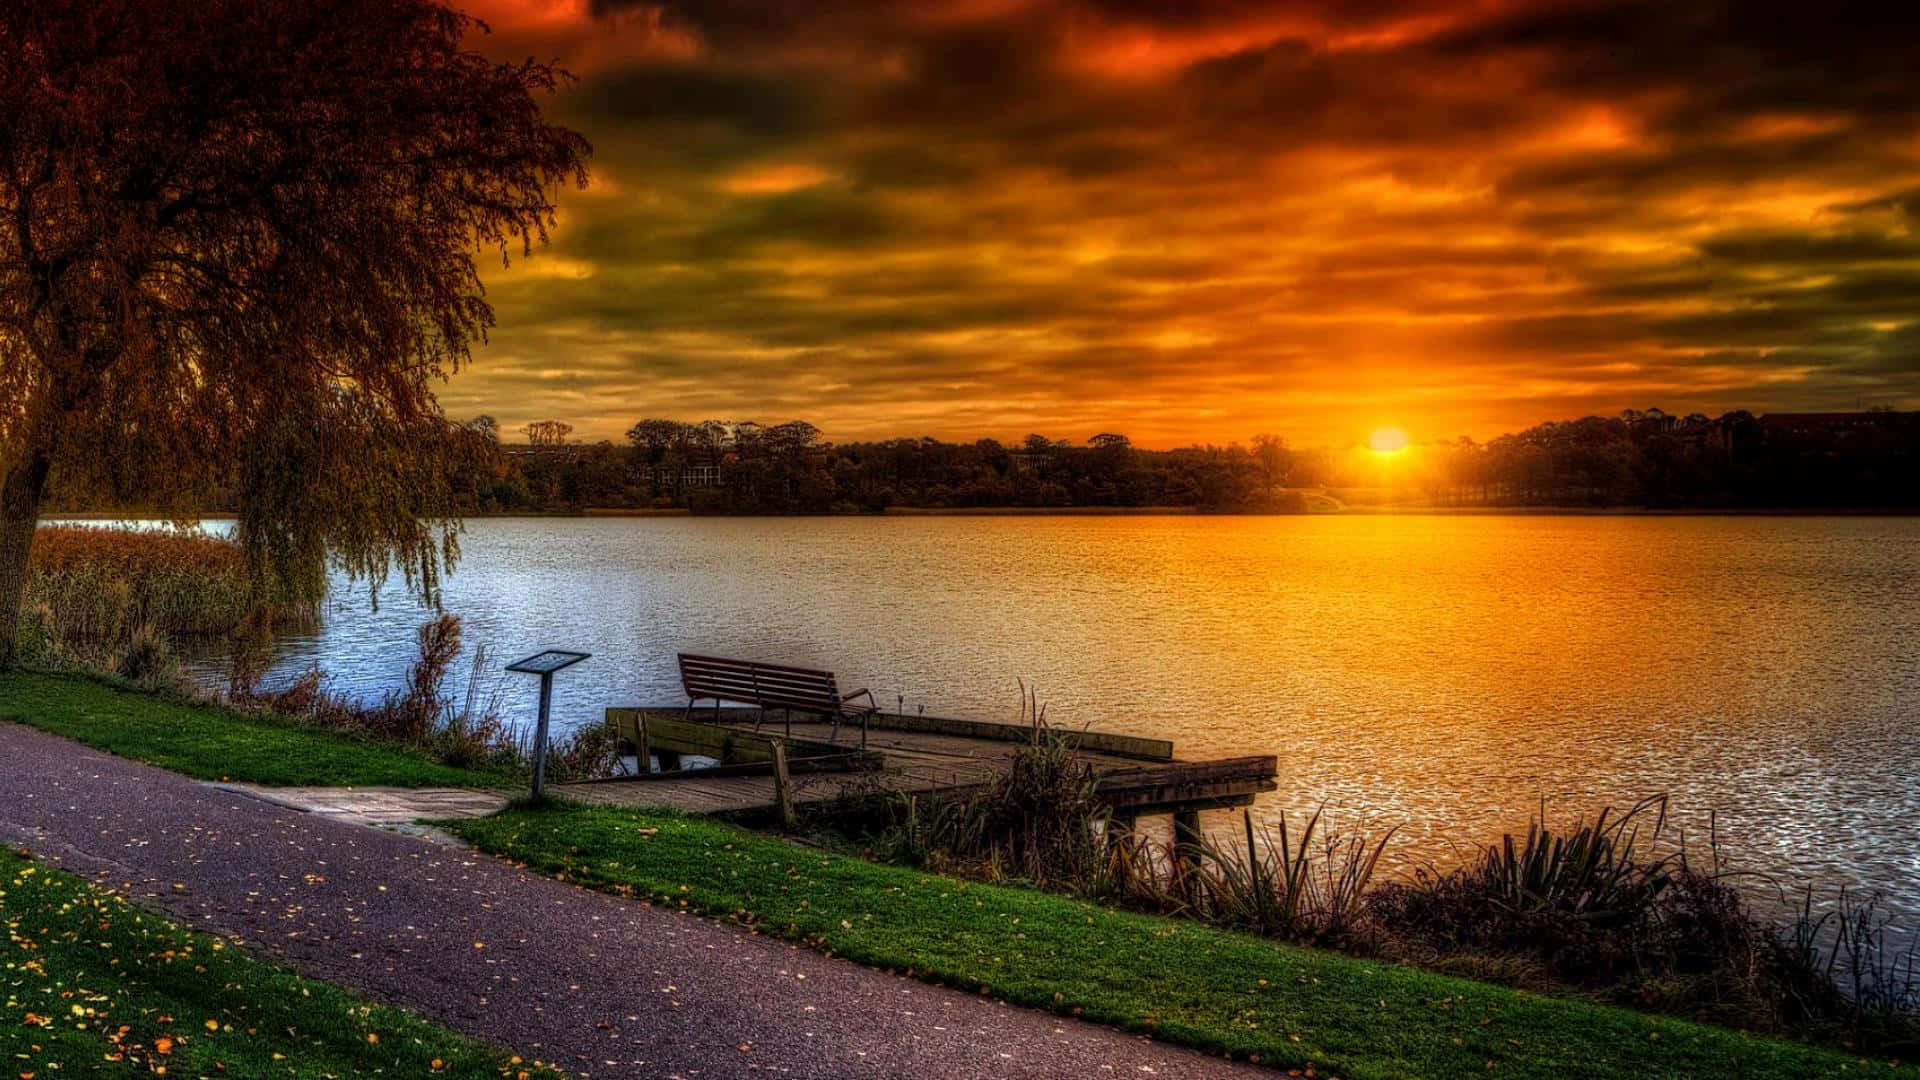 Fall Sunset: A Warm Golden Evening by the Lake Wallpaper